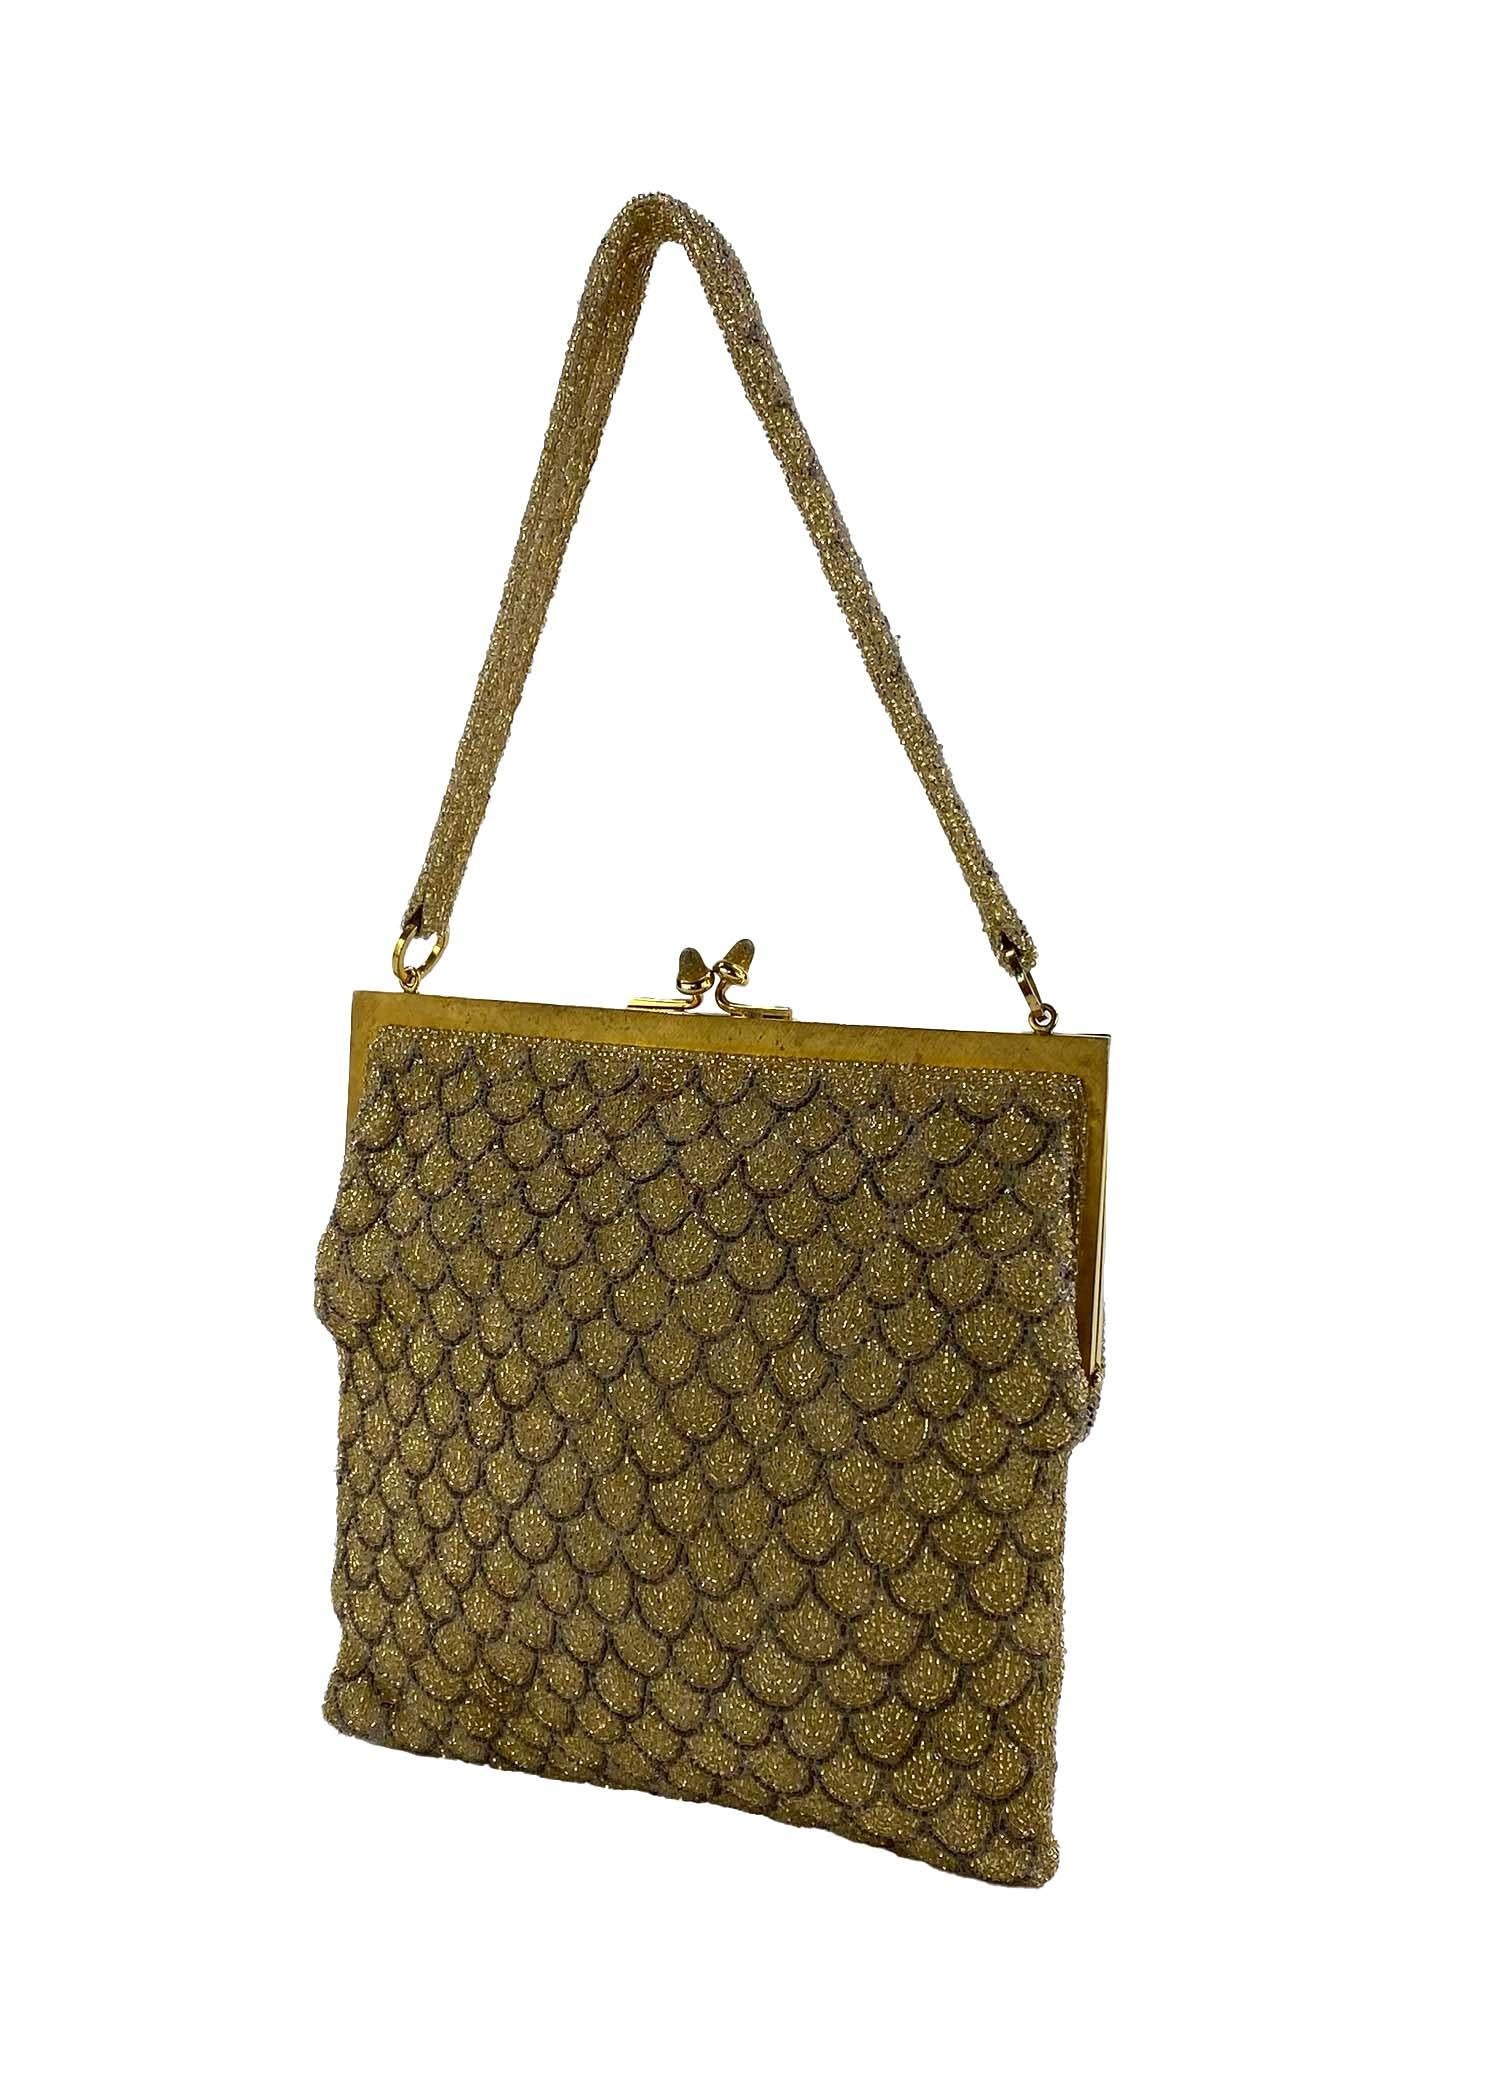 TheRealList presents: a very vintage beaded Gucci evening bag. This stunning bag is likely from the 1960s and is completely made of caviar beads fashioned in a scallop pattern around a gold colored metal frame with a kiss lock. From the early days